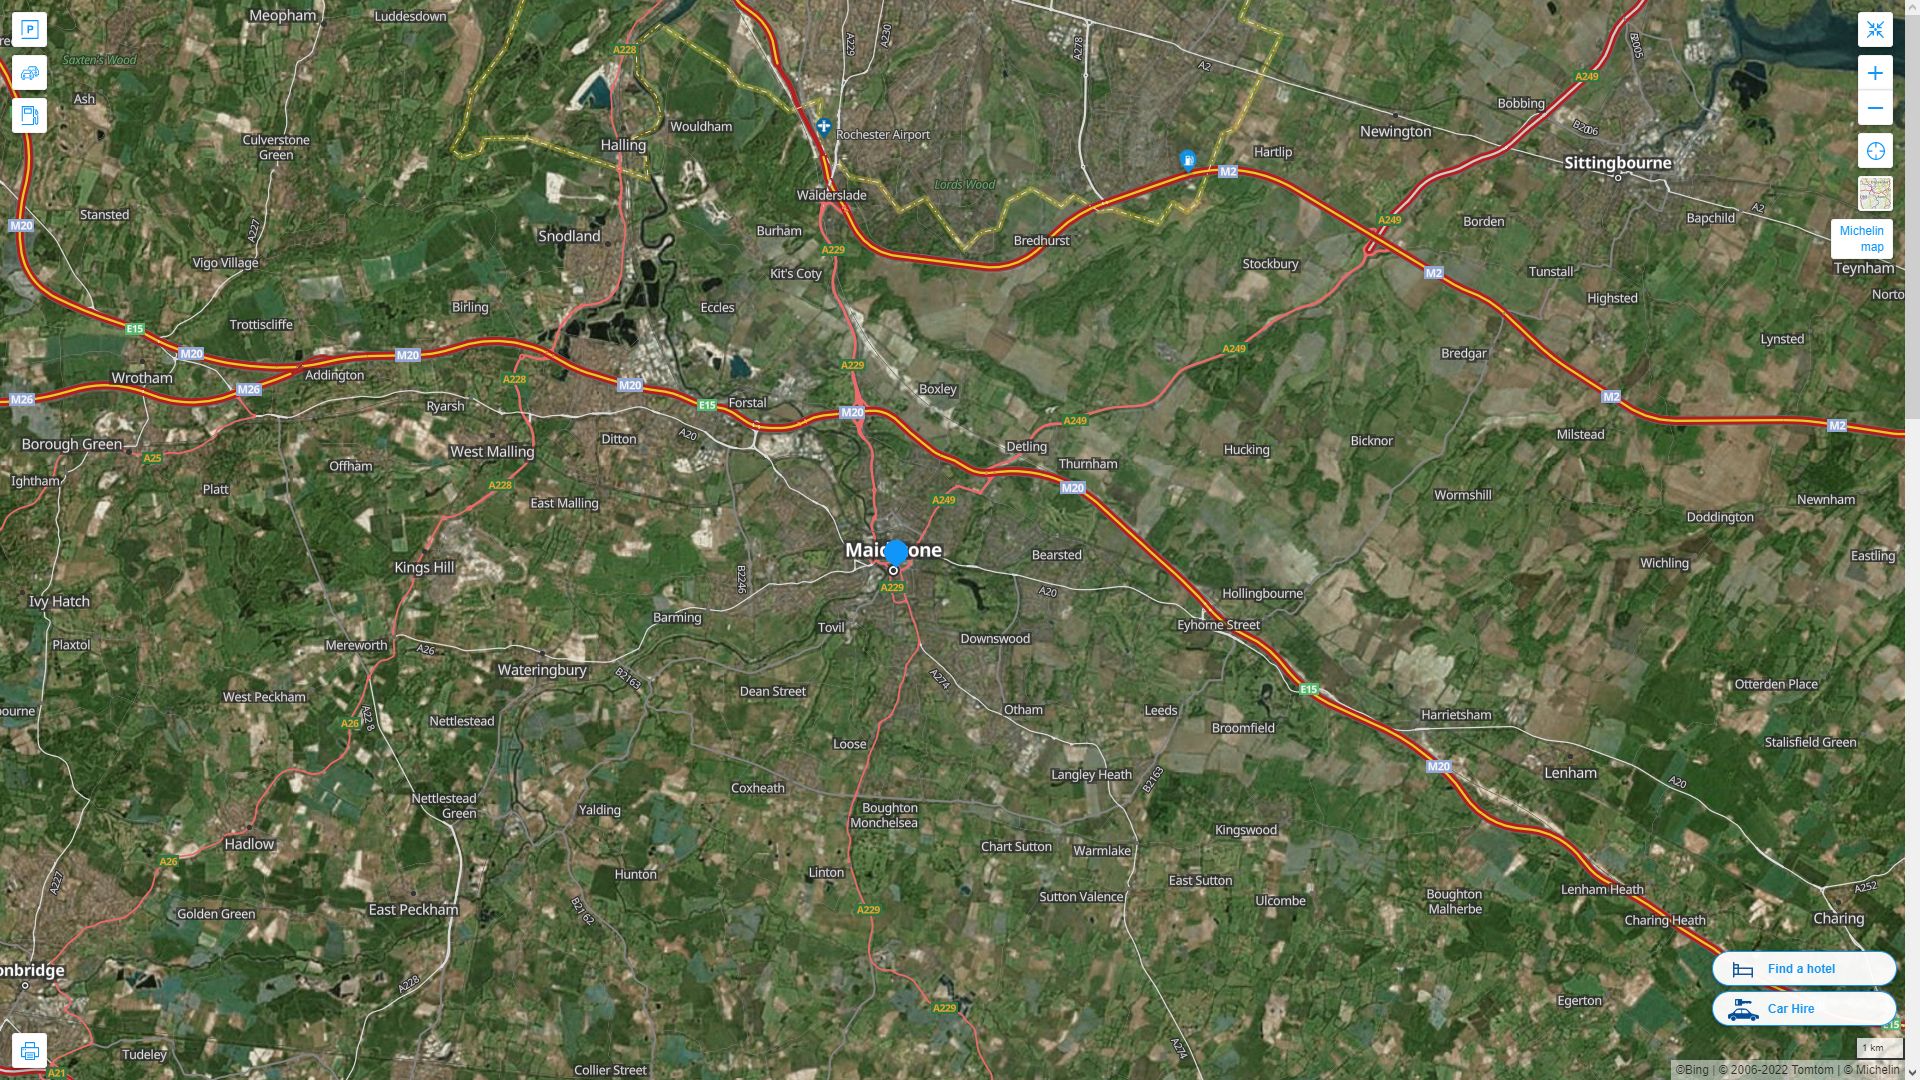 Maidstone Highway and Road Map with Satellite View